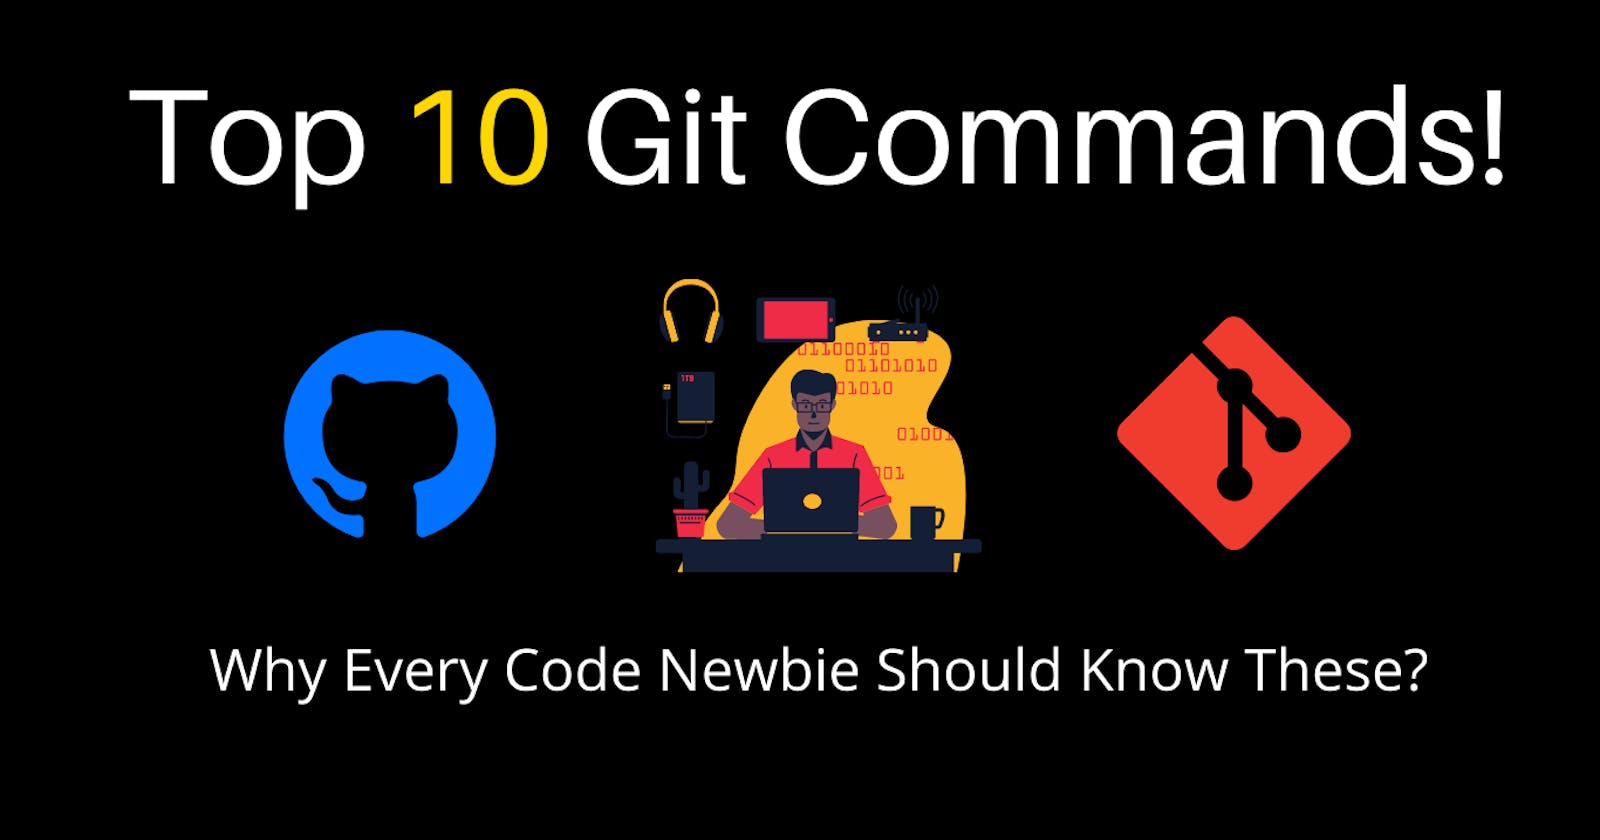 Top 10 Git Commands For Code Newbies!